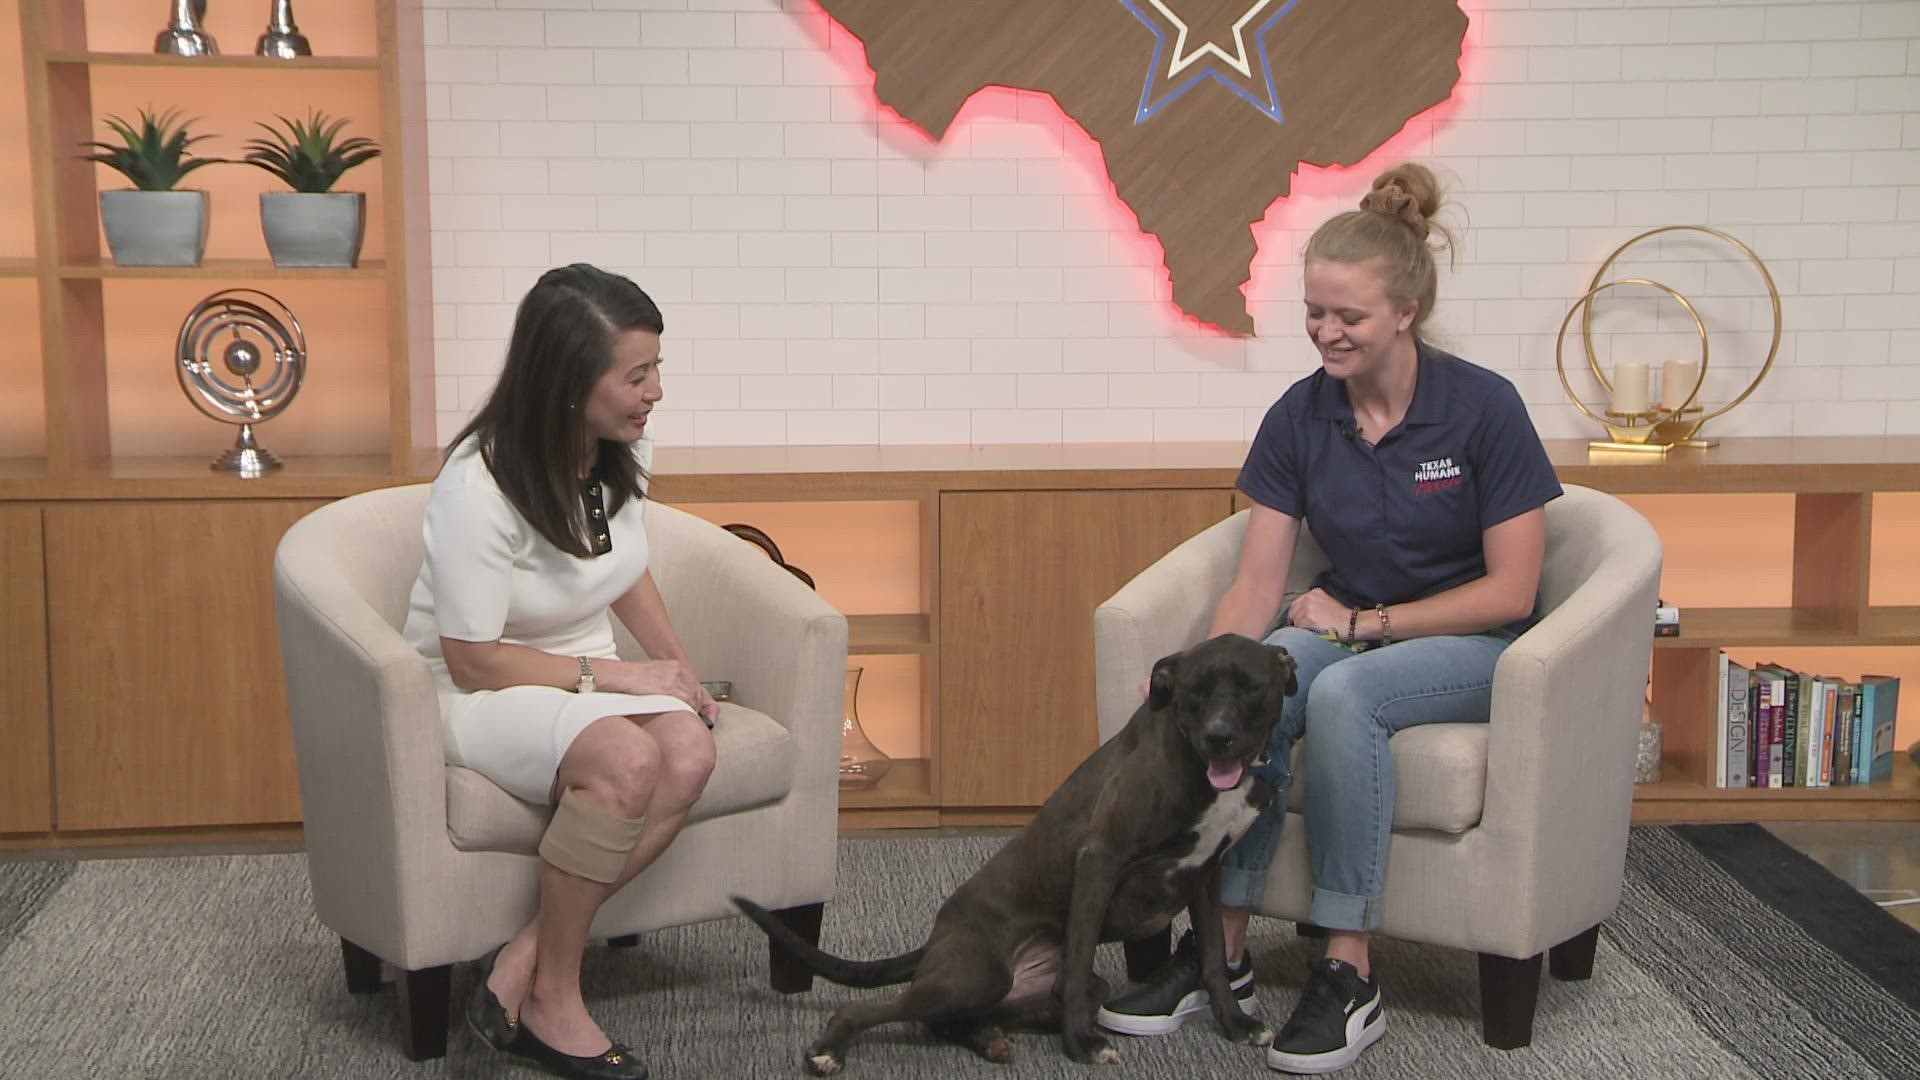 Every Friday, KVUE is showcasing pets in need of adoption. This week, Sam Rogers with Texas Humane Heroes introduced us to Juenbug.